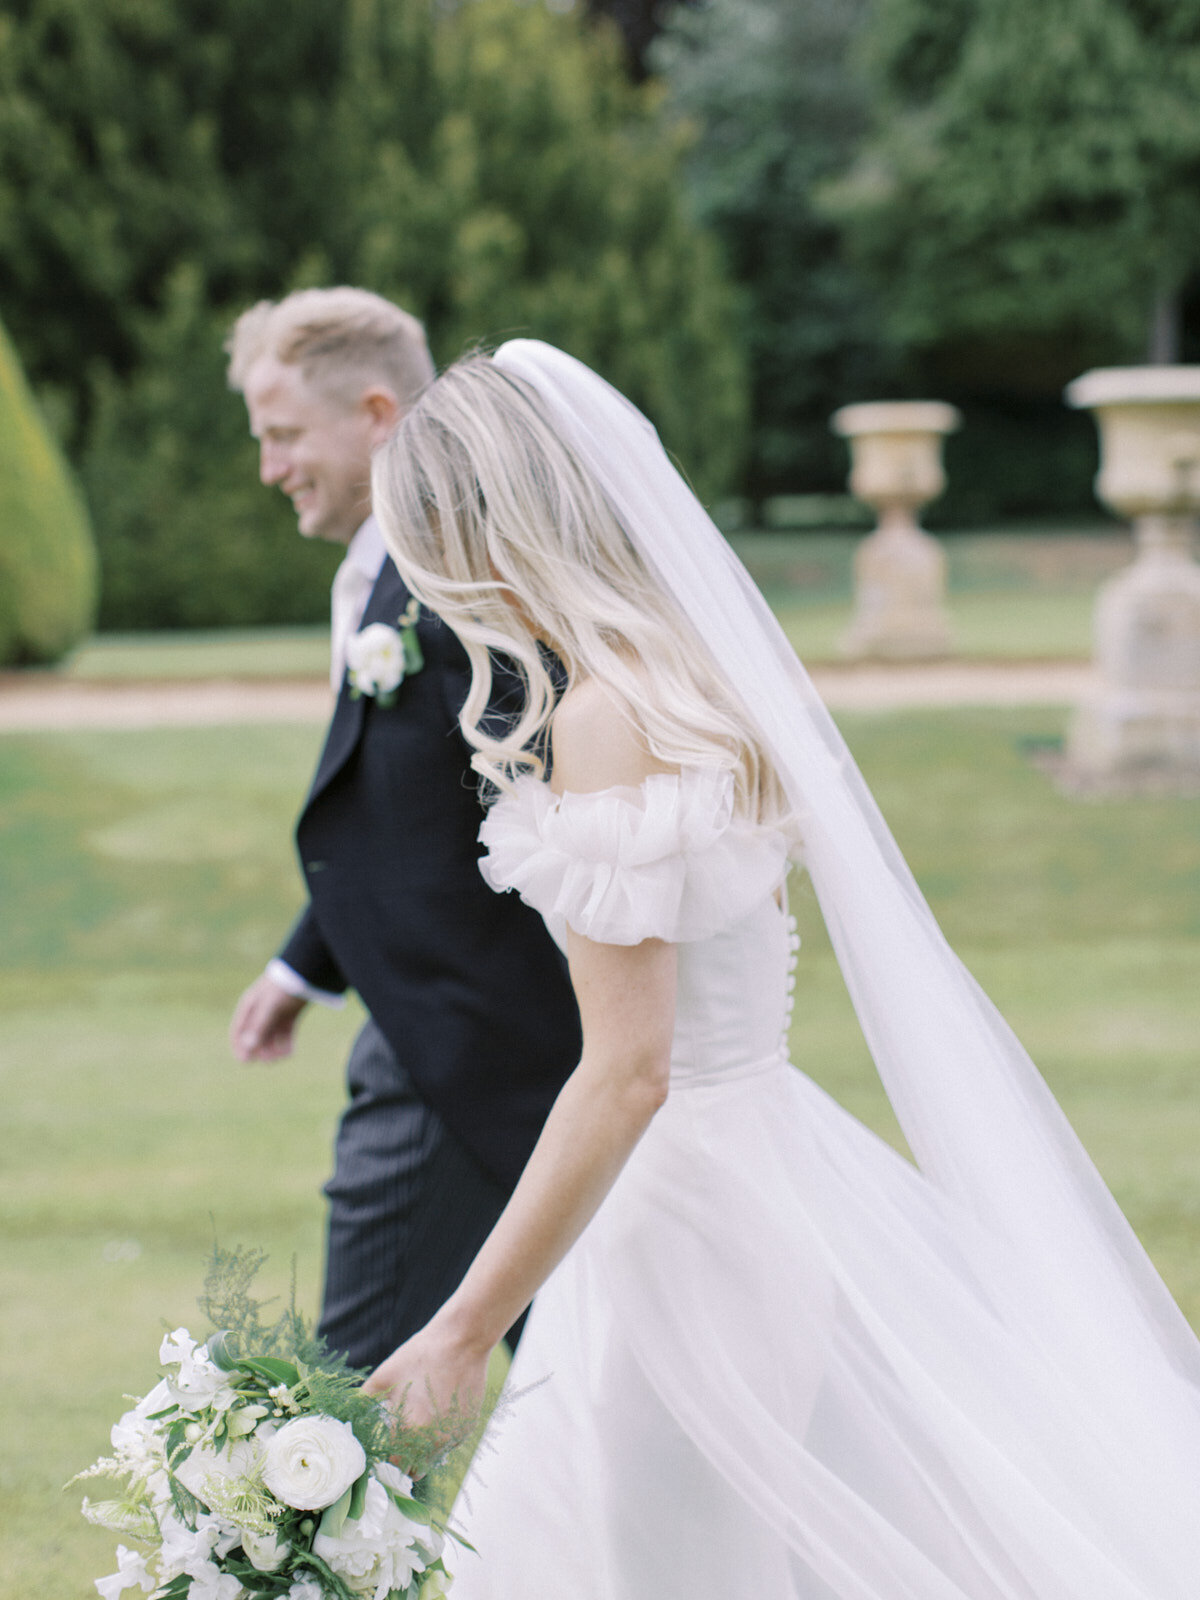 bride and groom relaxed moment walking in the gardens, bride holding white flower bouquet and groom smiling